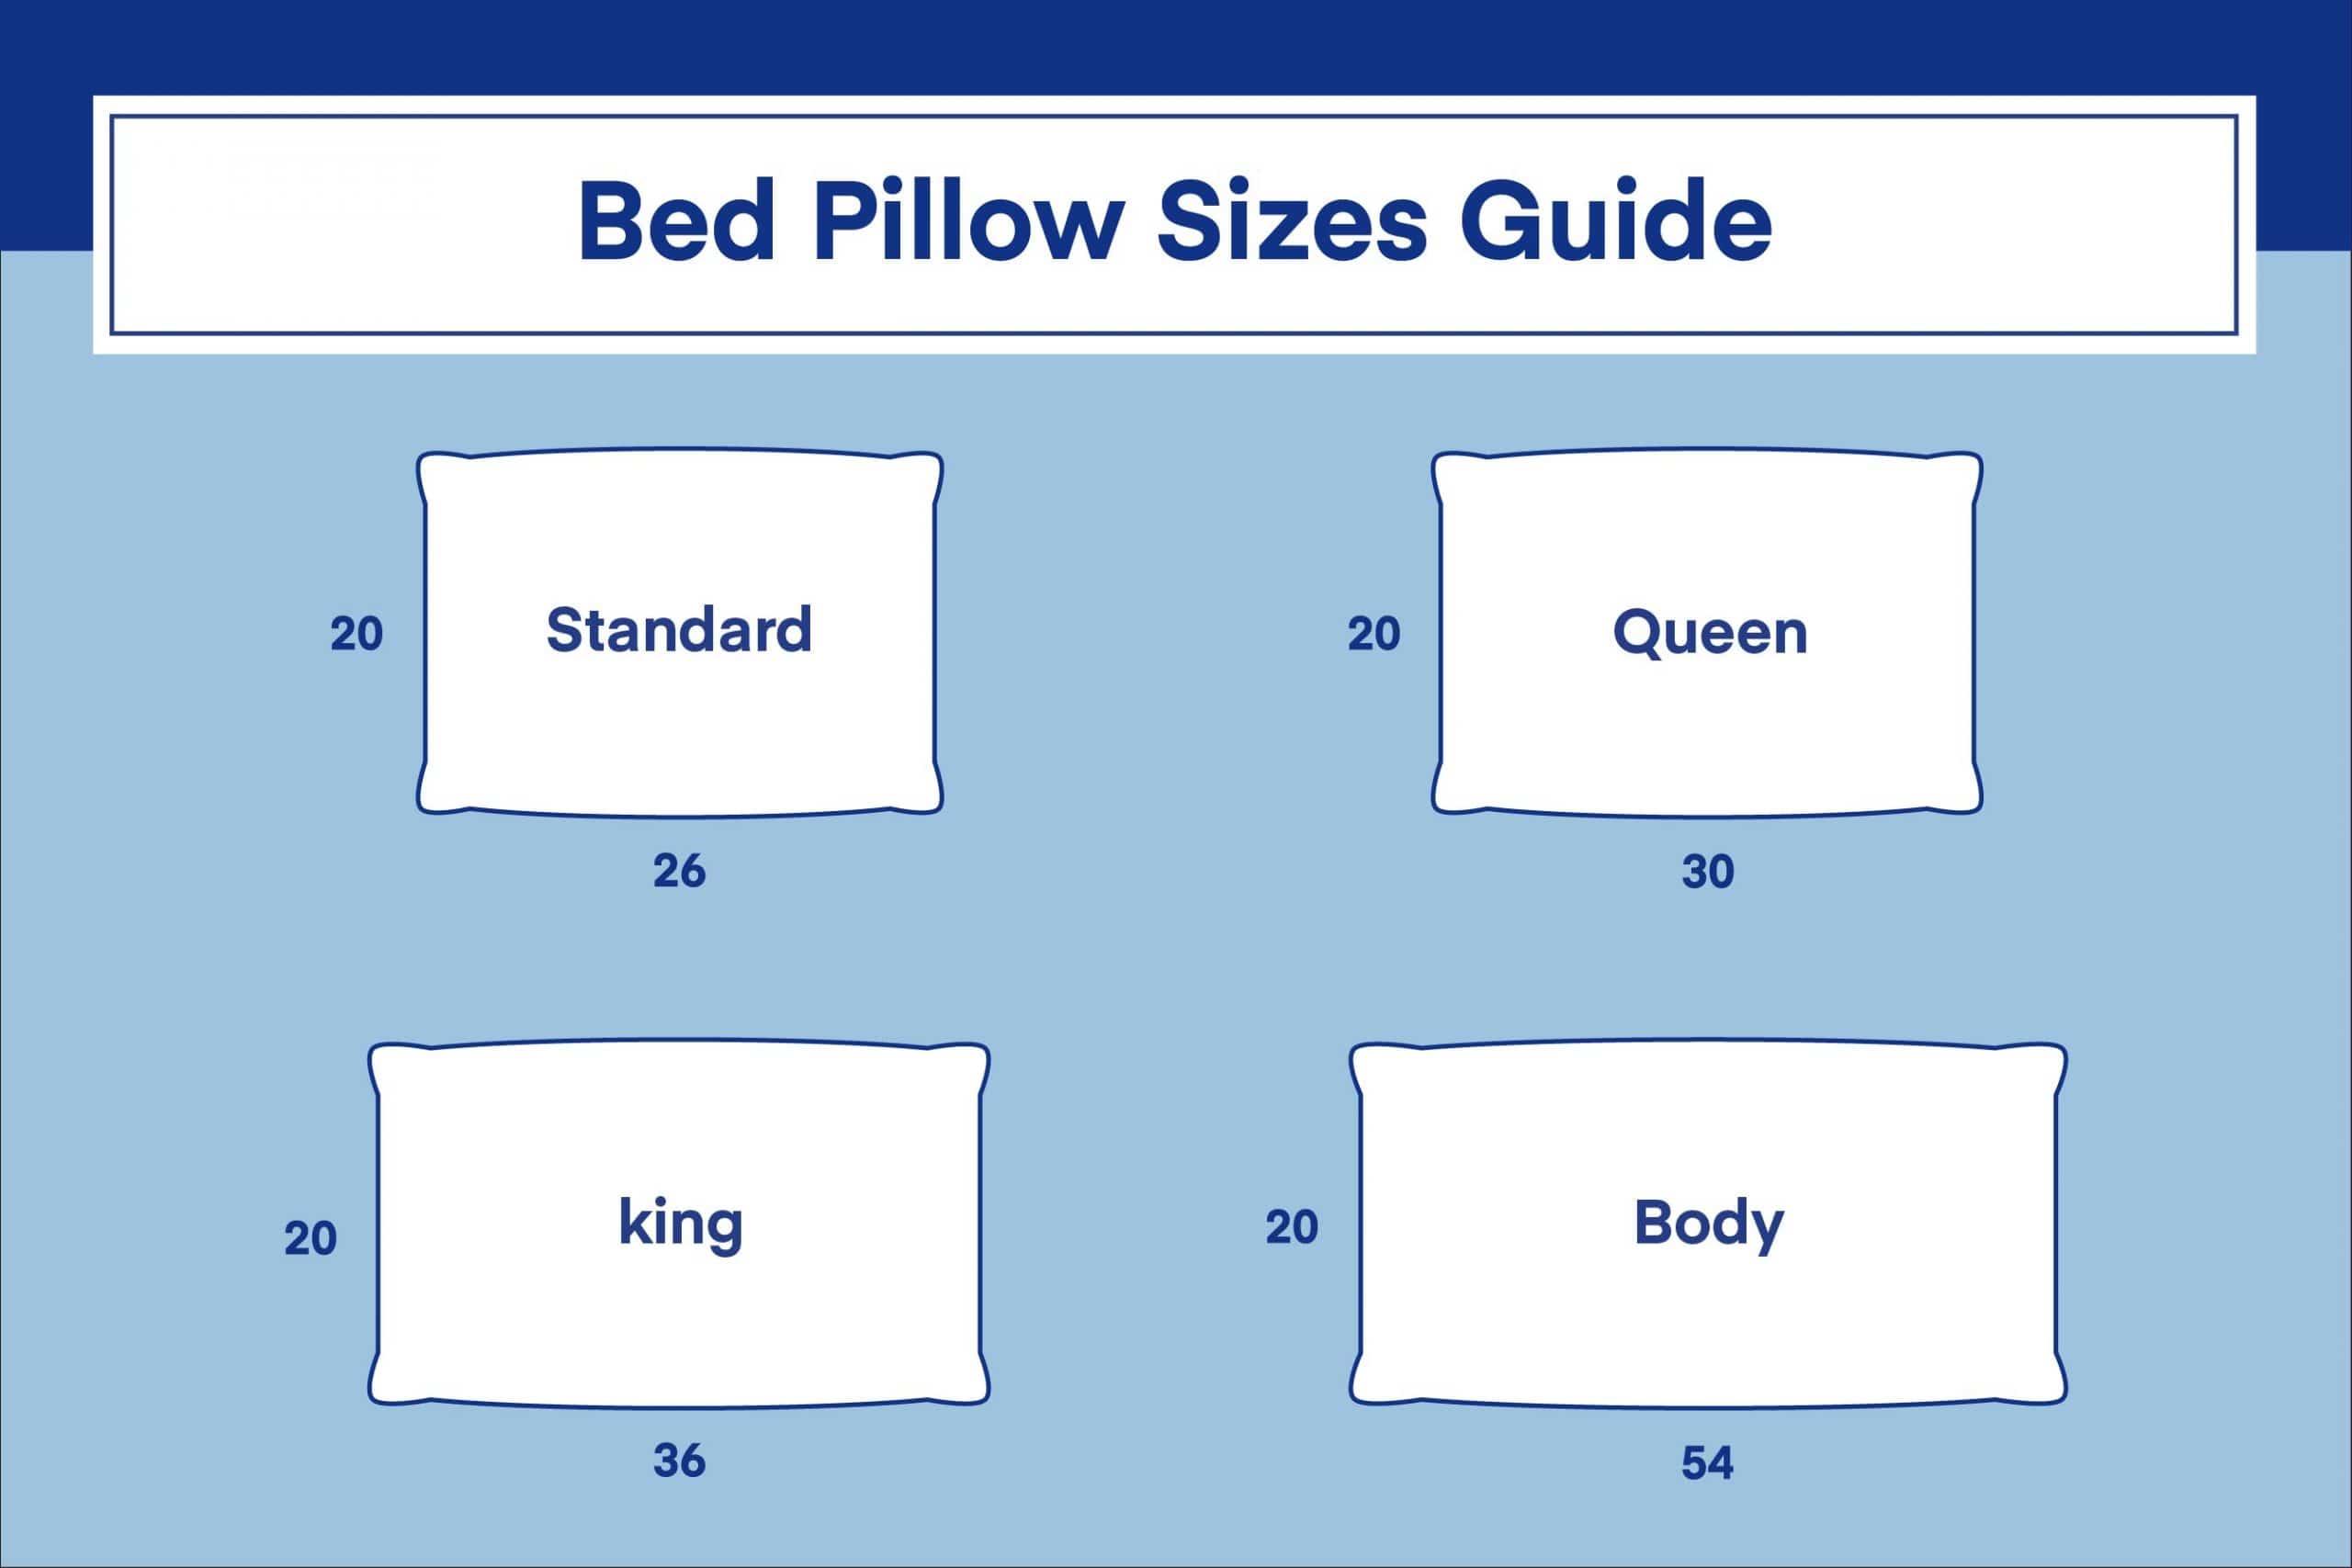 Bed Pillow Sizes Guide Amerisleep,How To Clean Porcelain Tile Grout